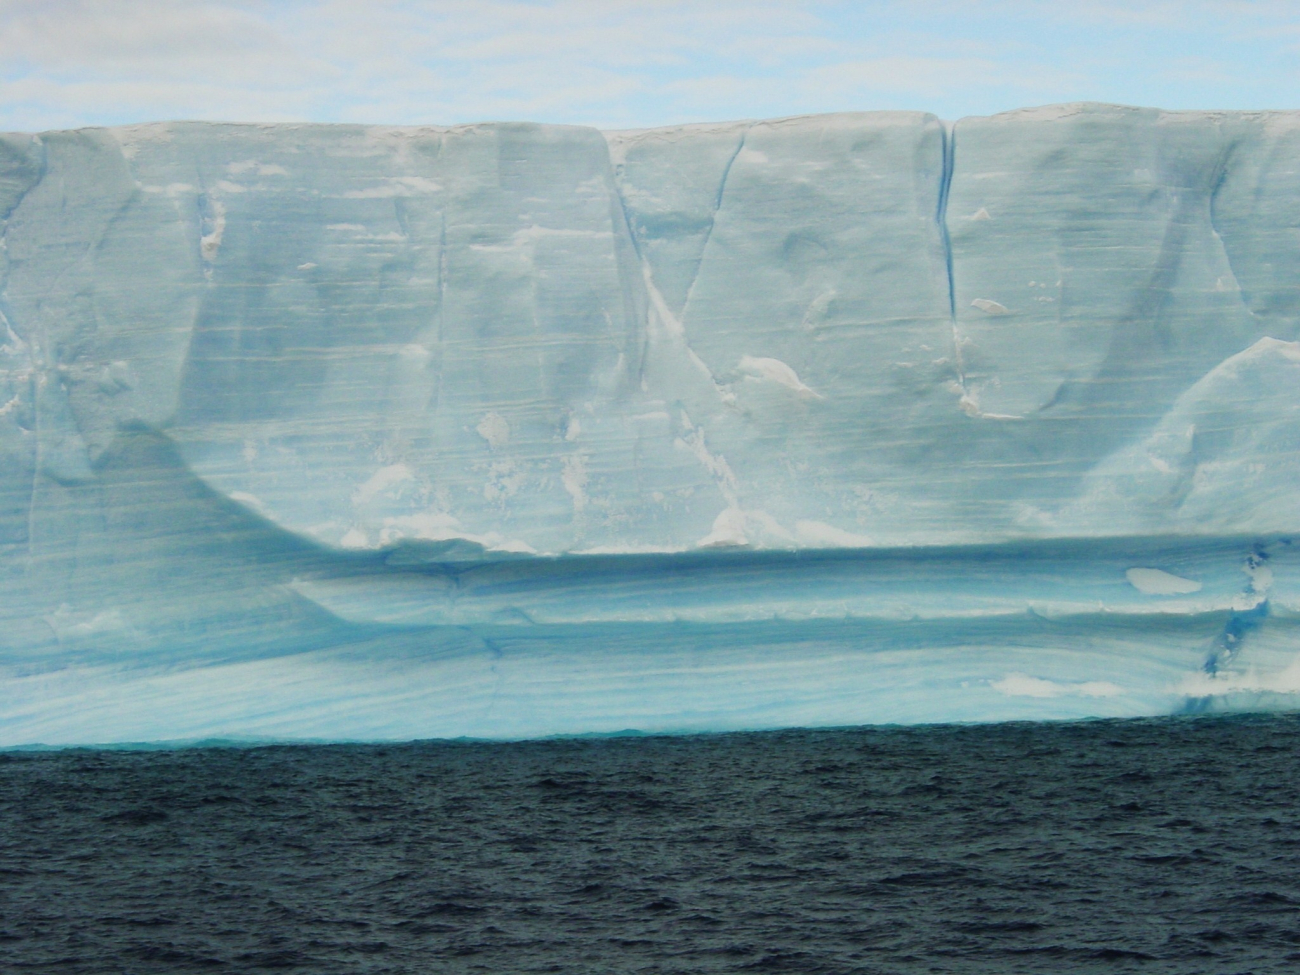 Banding of ice clearly seen in this closeup view of a tabular iceberg